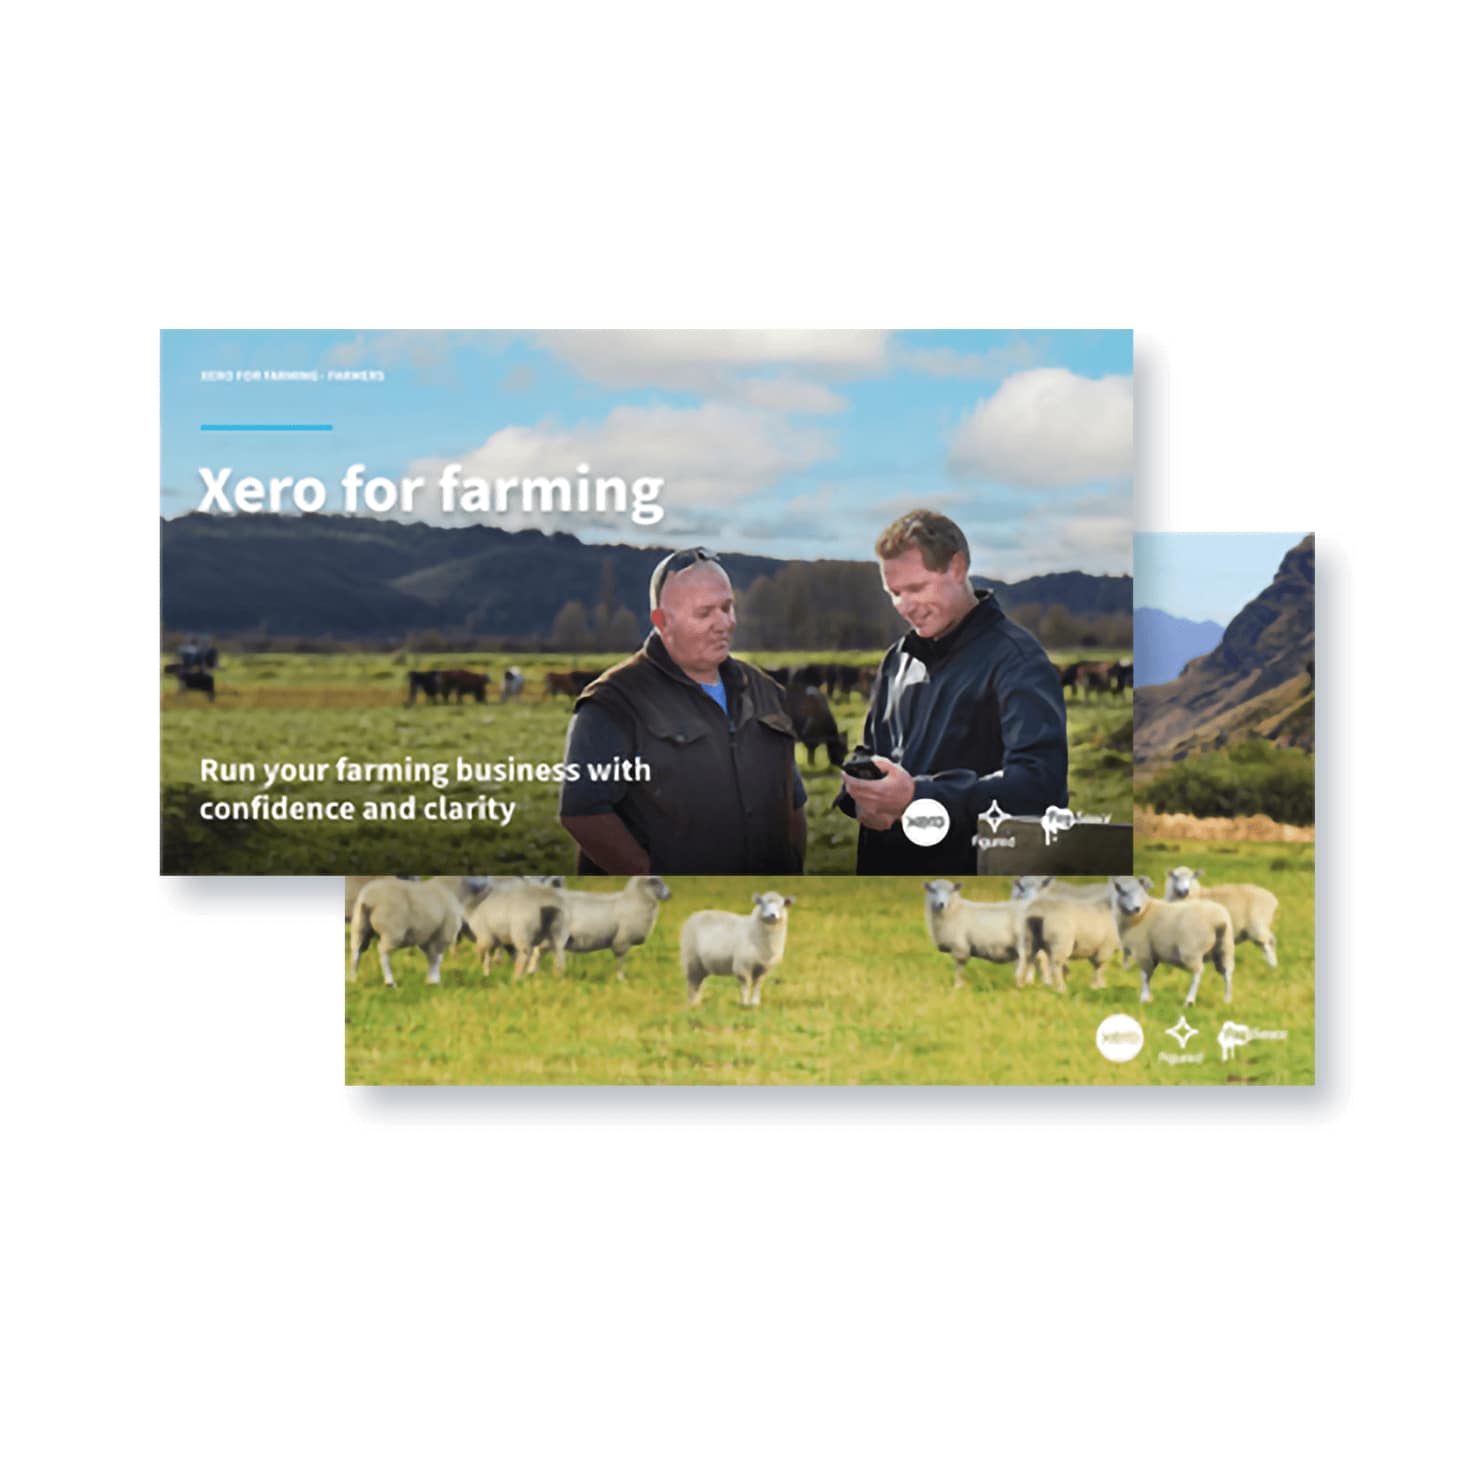 Two slides depicting a farmer and advisor in conversation, and a flock of sheep in a field.